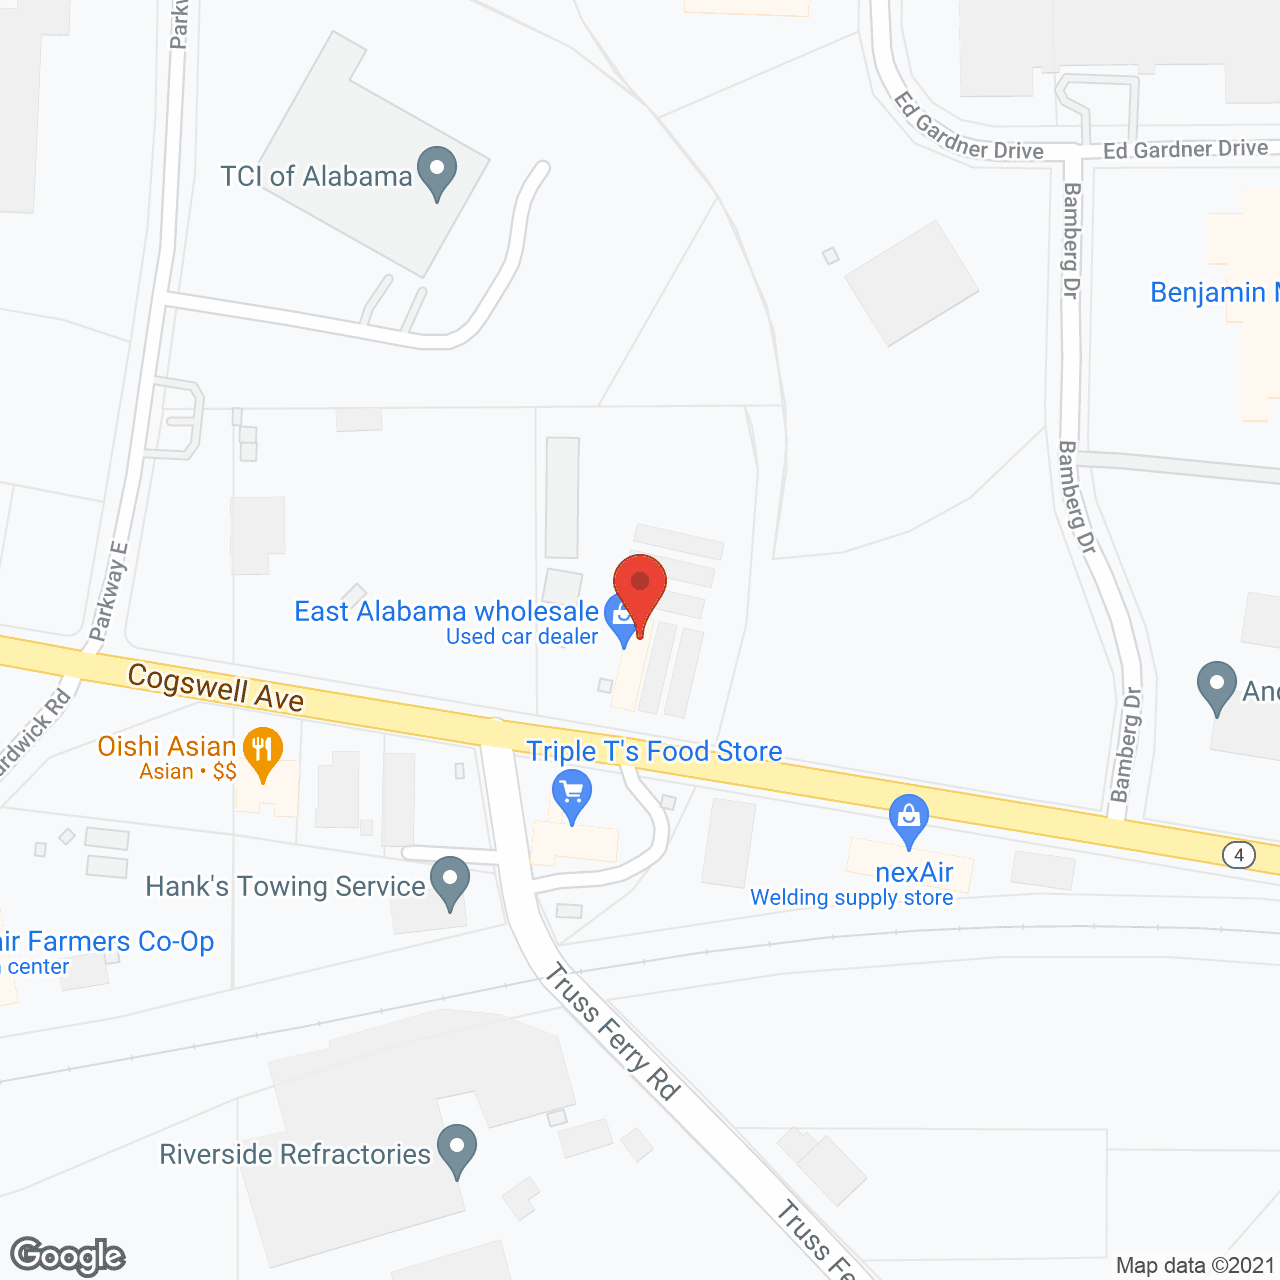 St Clair Health Care Ctr in google map